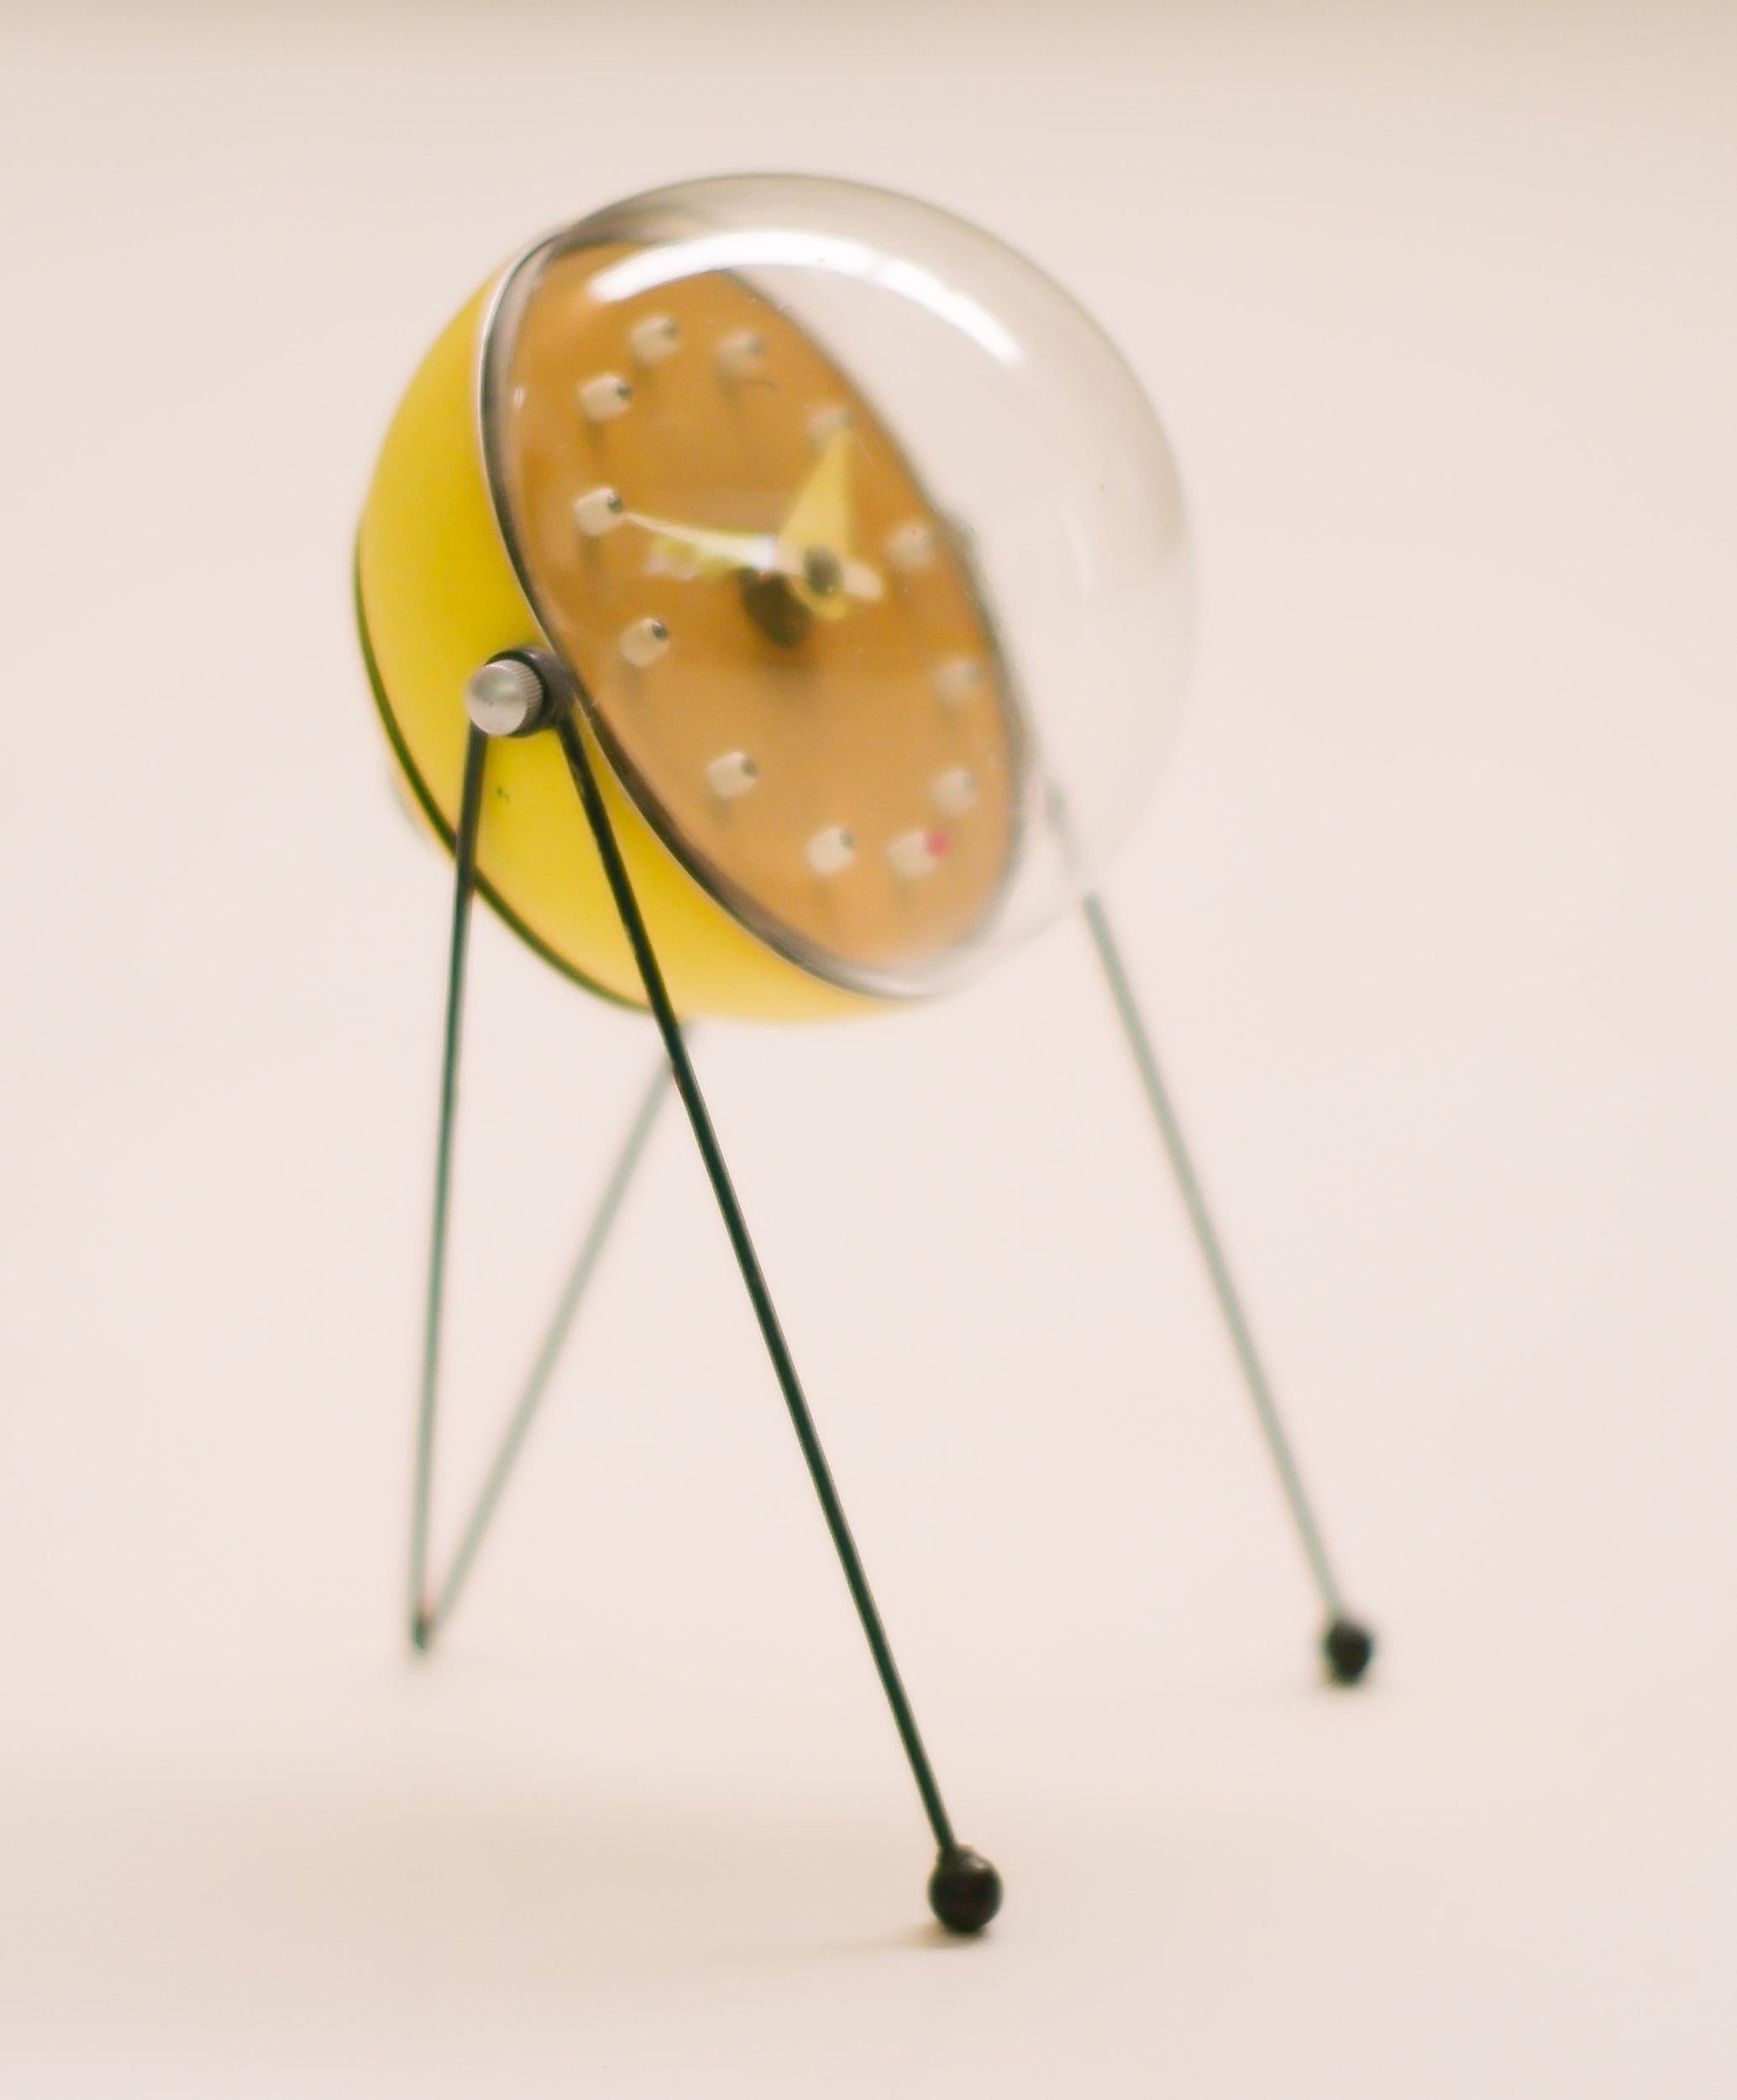 Steel 1950s Atomic Inspired Table Clock